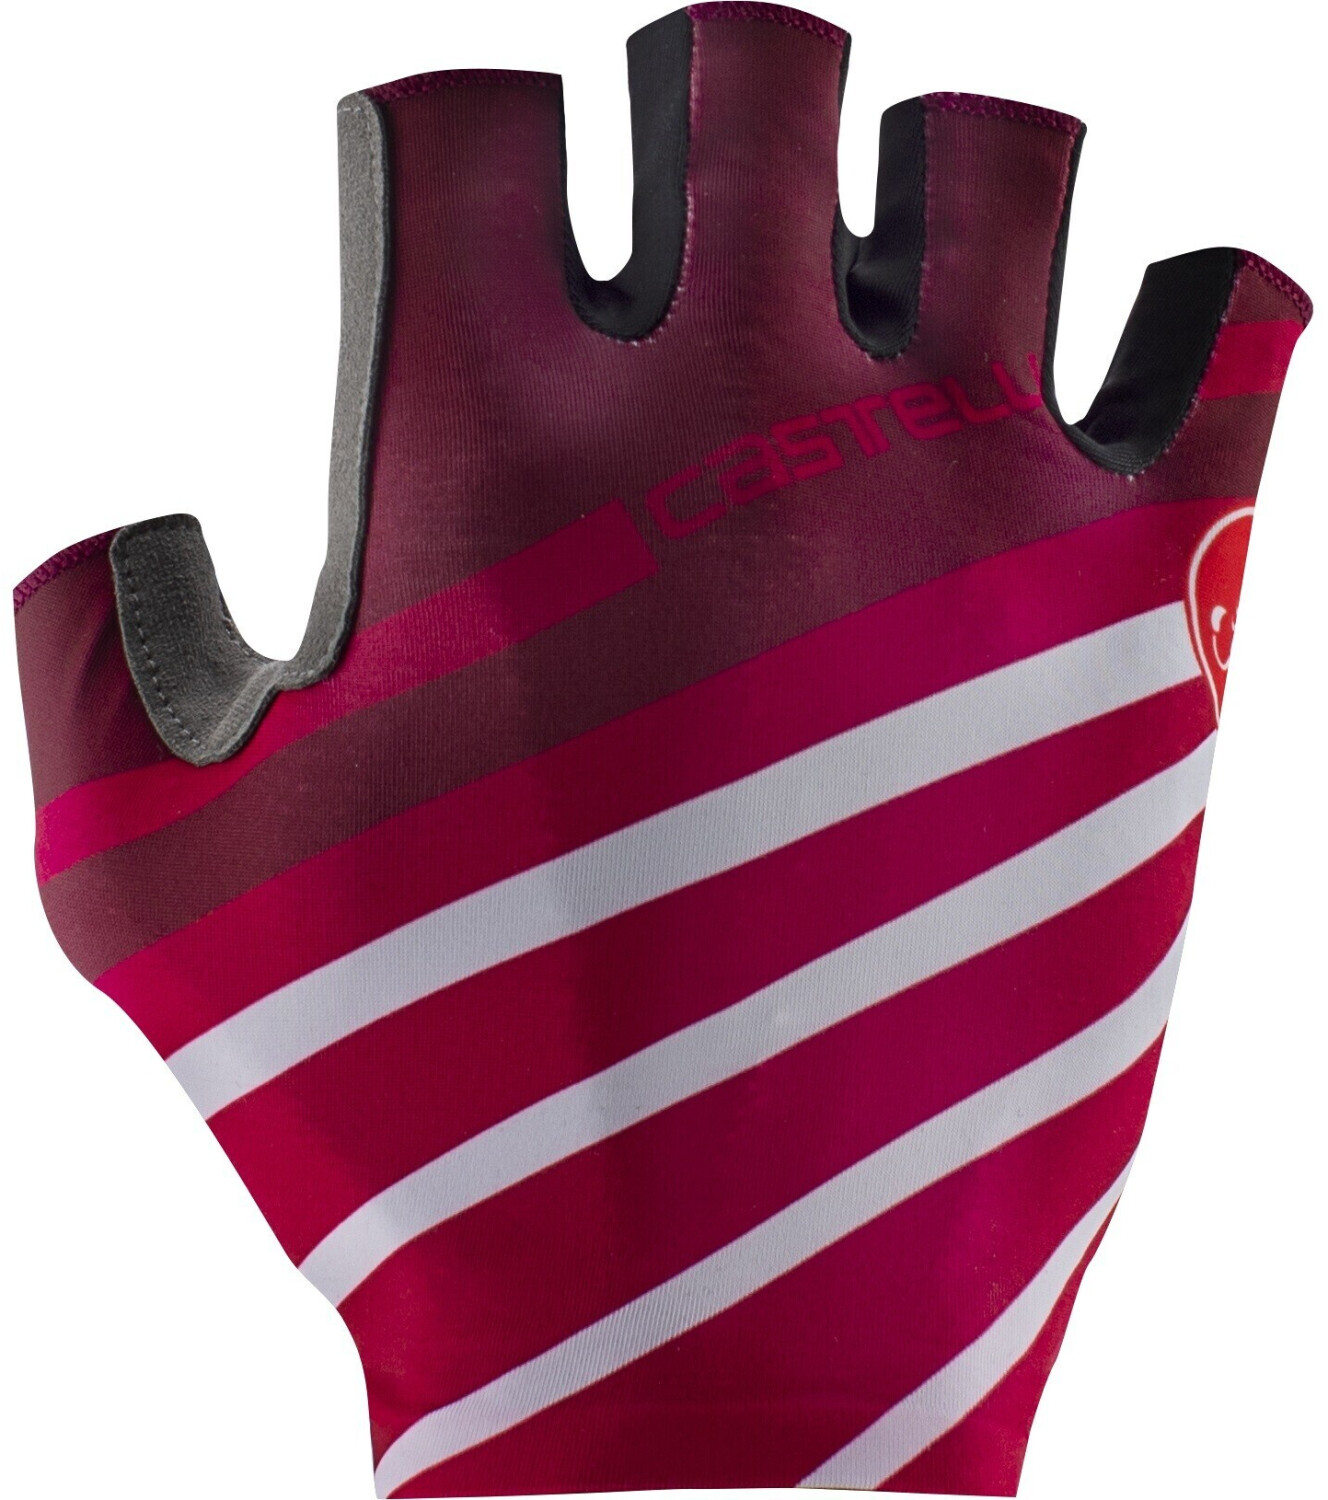 Photos - Cycling Gloves Castelli Competizione 2 gloves bordeaux/persian red 